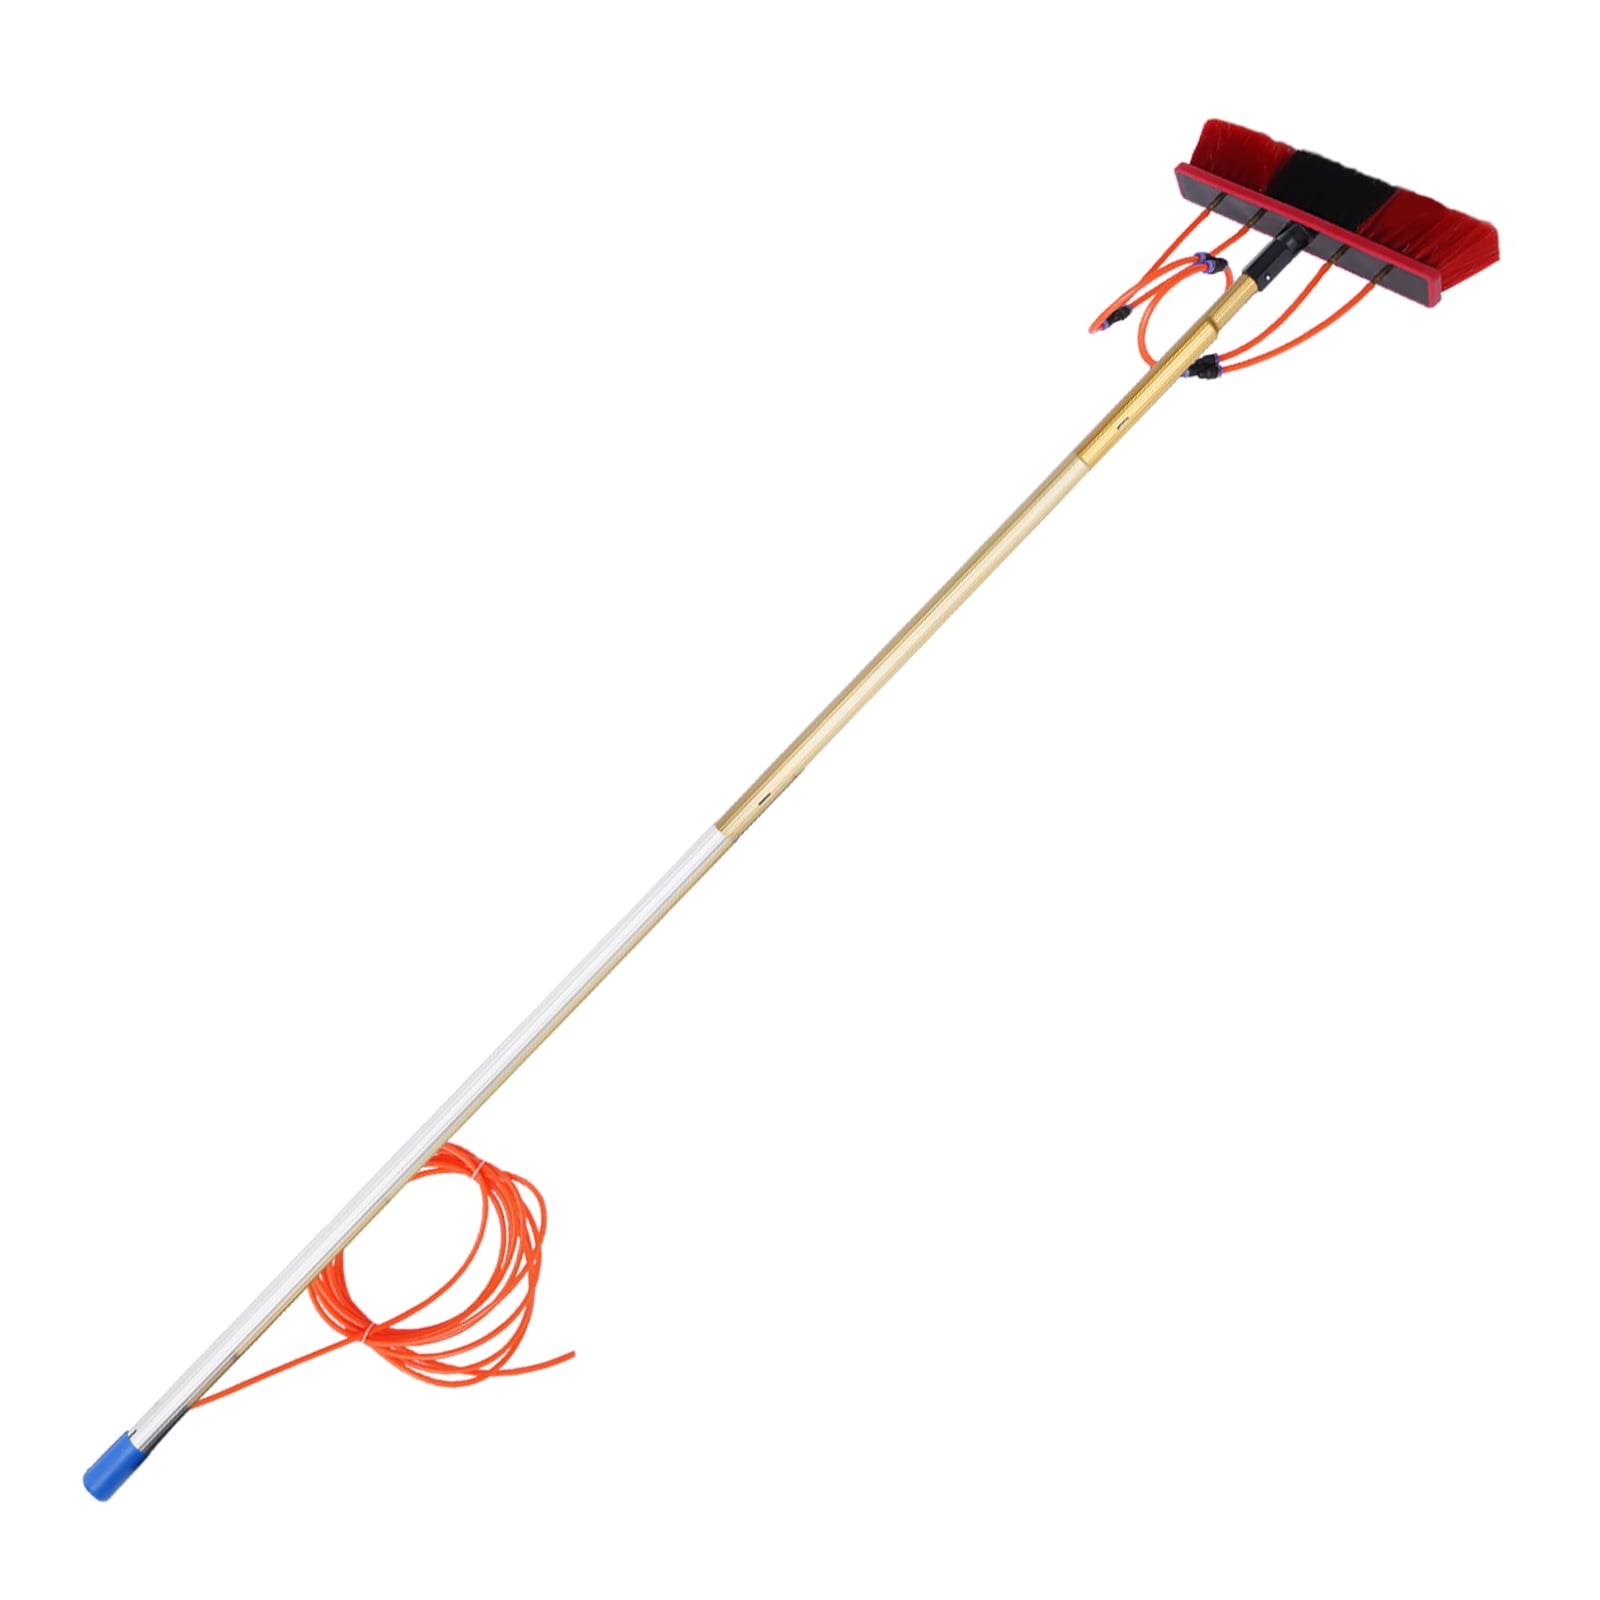 JOYDING Water Fed Brush Cleaning System Aluminum Alloy Washing Tool for Window  Glass and Solar Panel